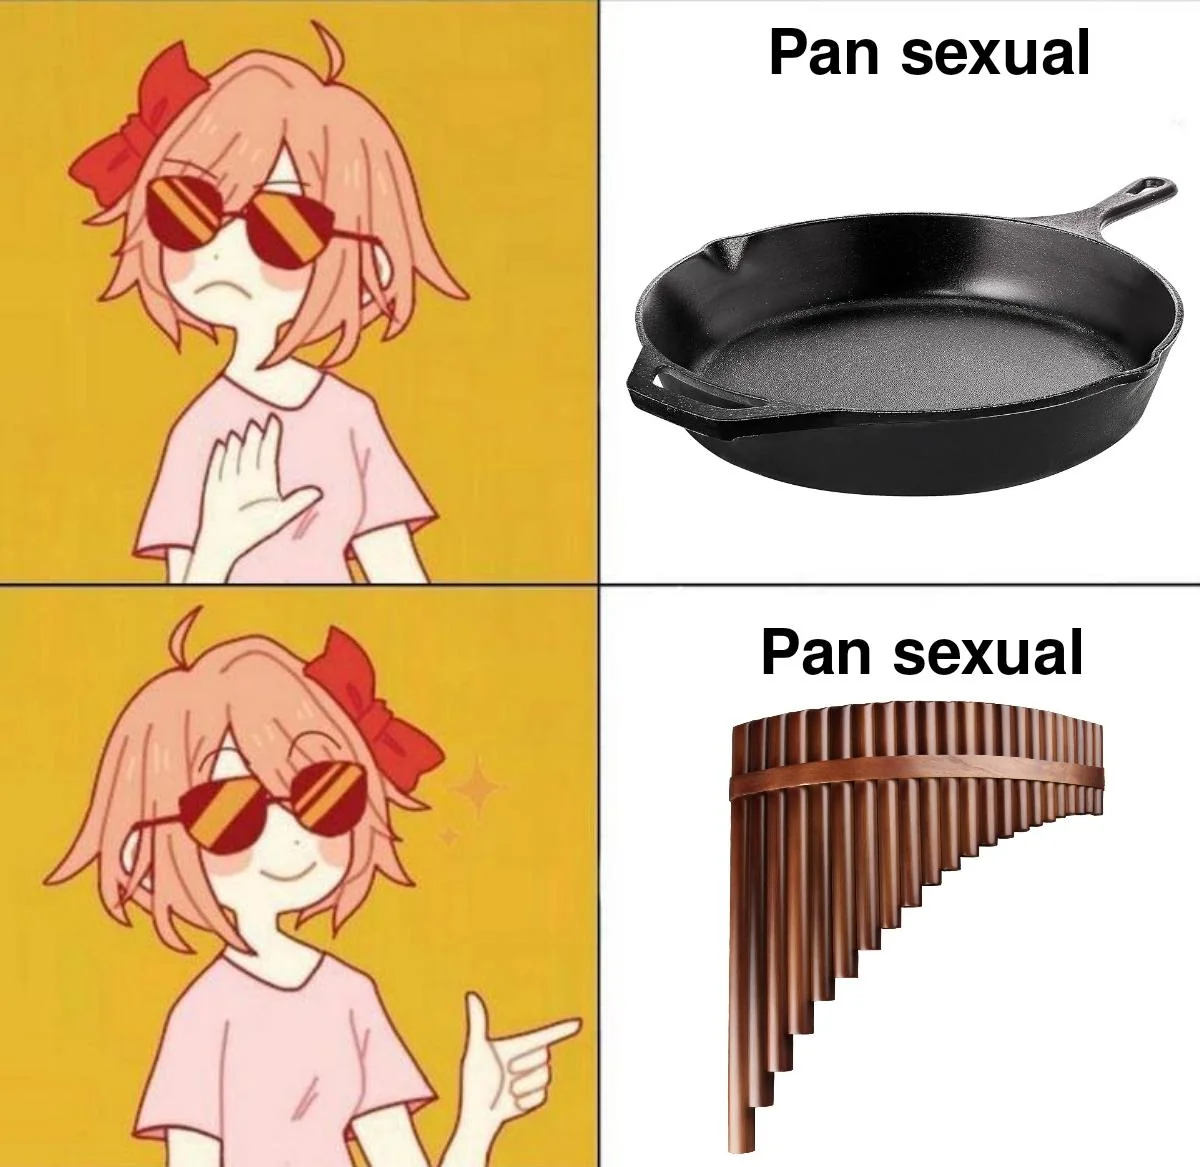 a cartoon of a girl wearing sunglasses and a pan